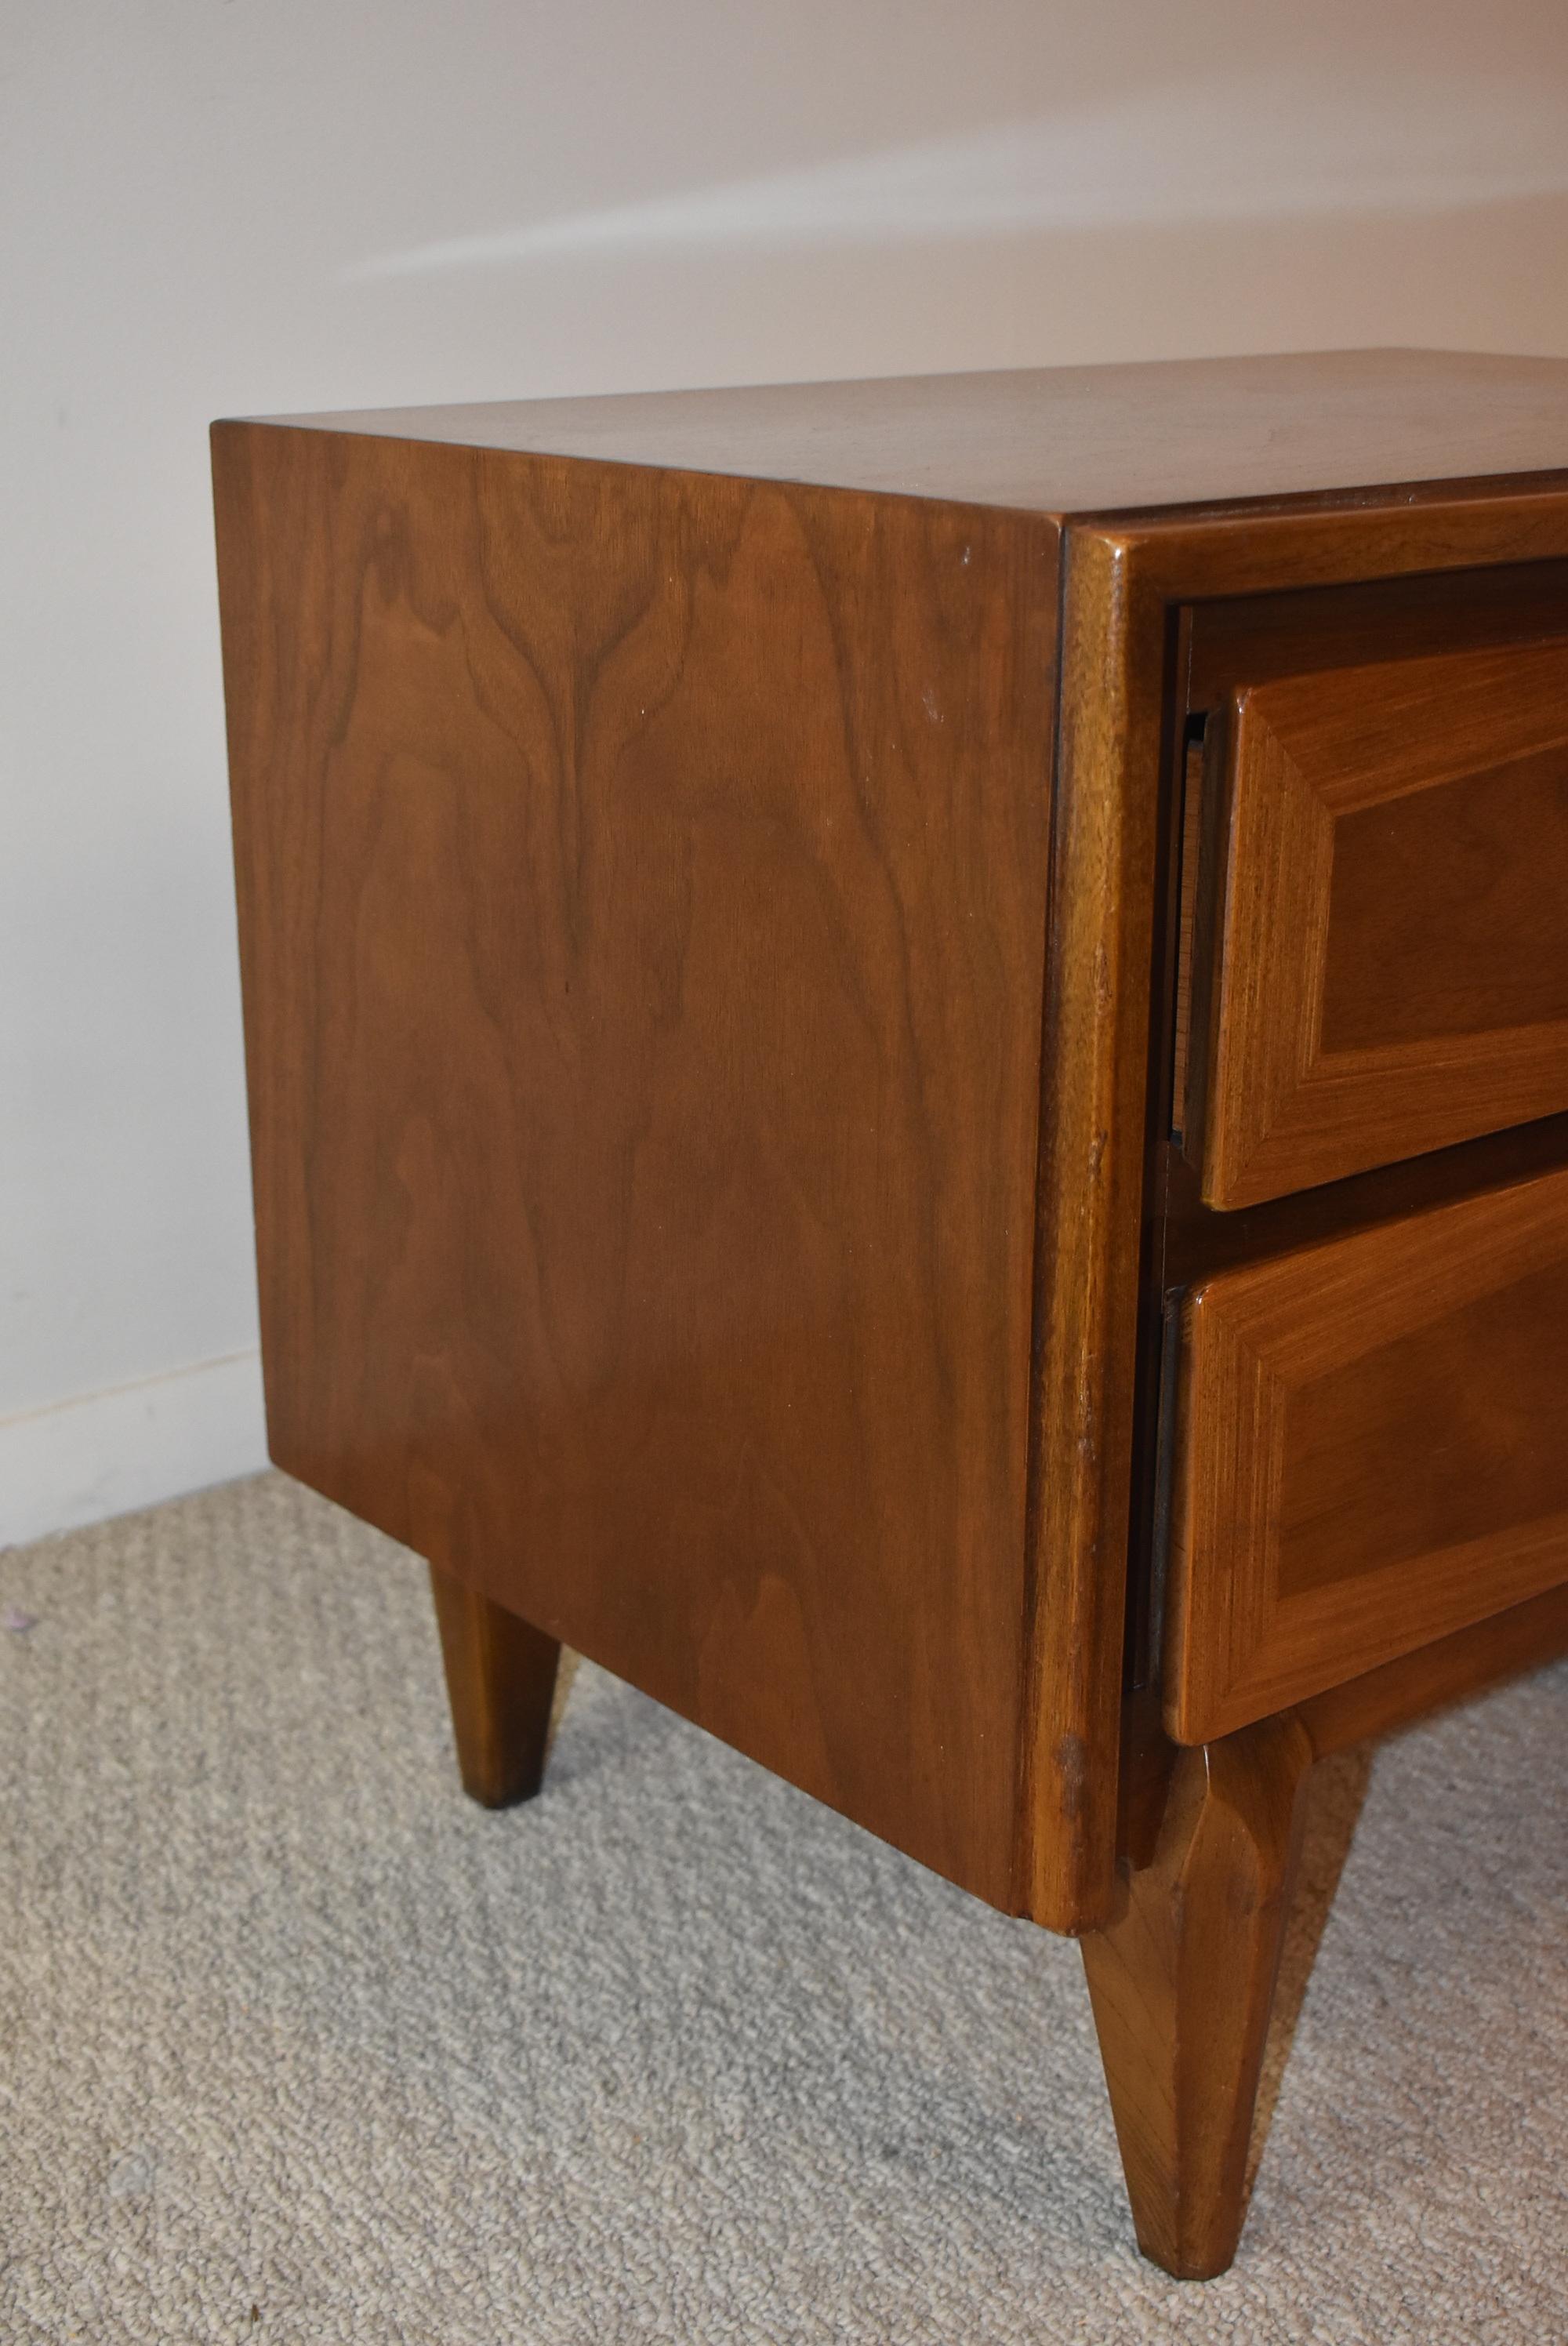 Walnut mid-century modern American of Martinsville 2-drawer night stand with diamond pattern inlaid drawer fronts and sculpted legs. Great condition. Part of a 4-piece set. 20 1/2